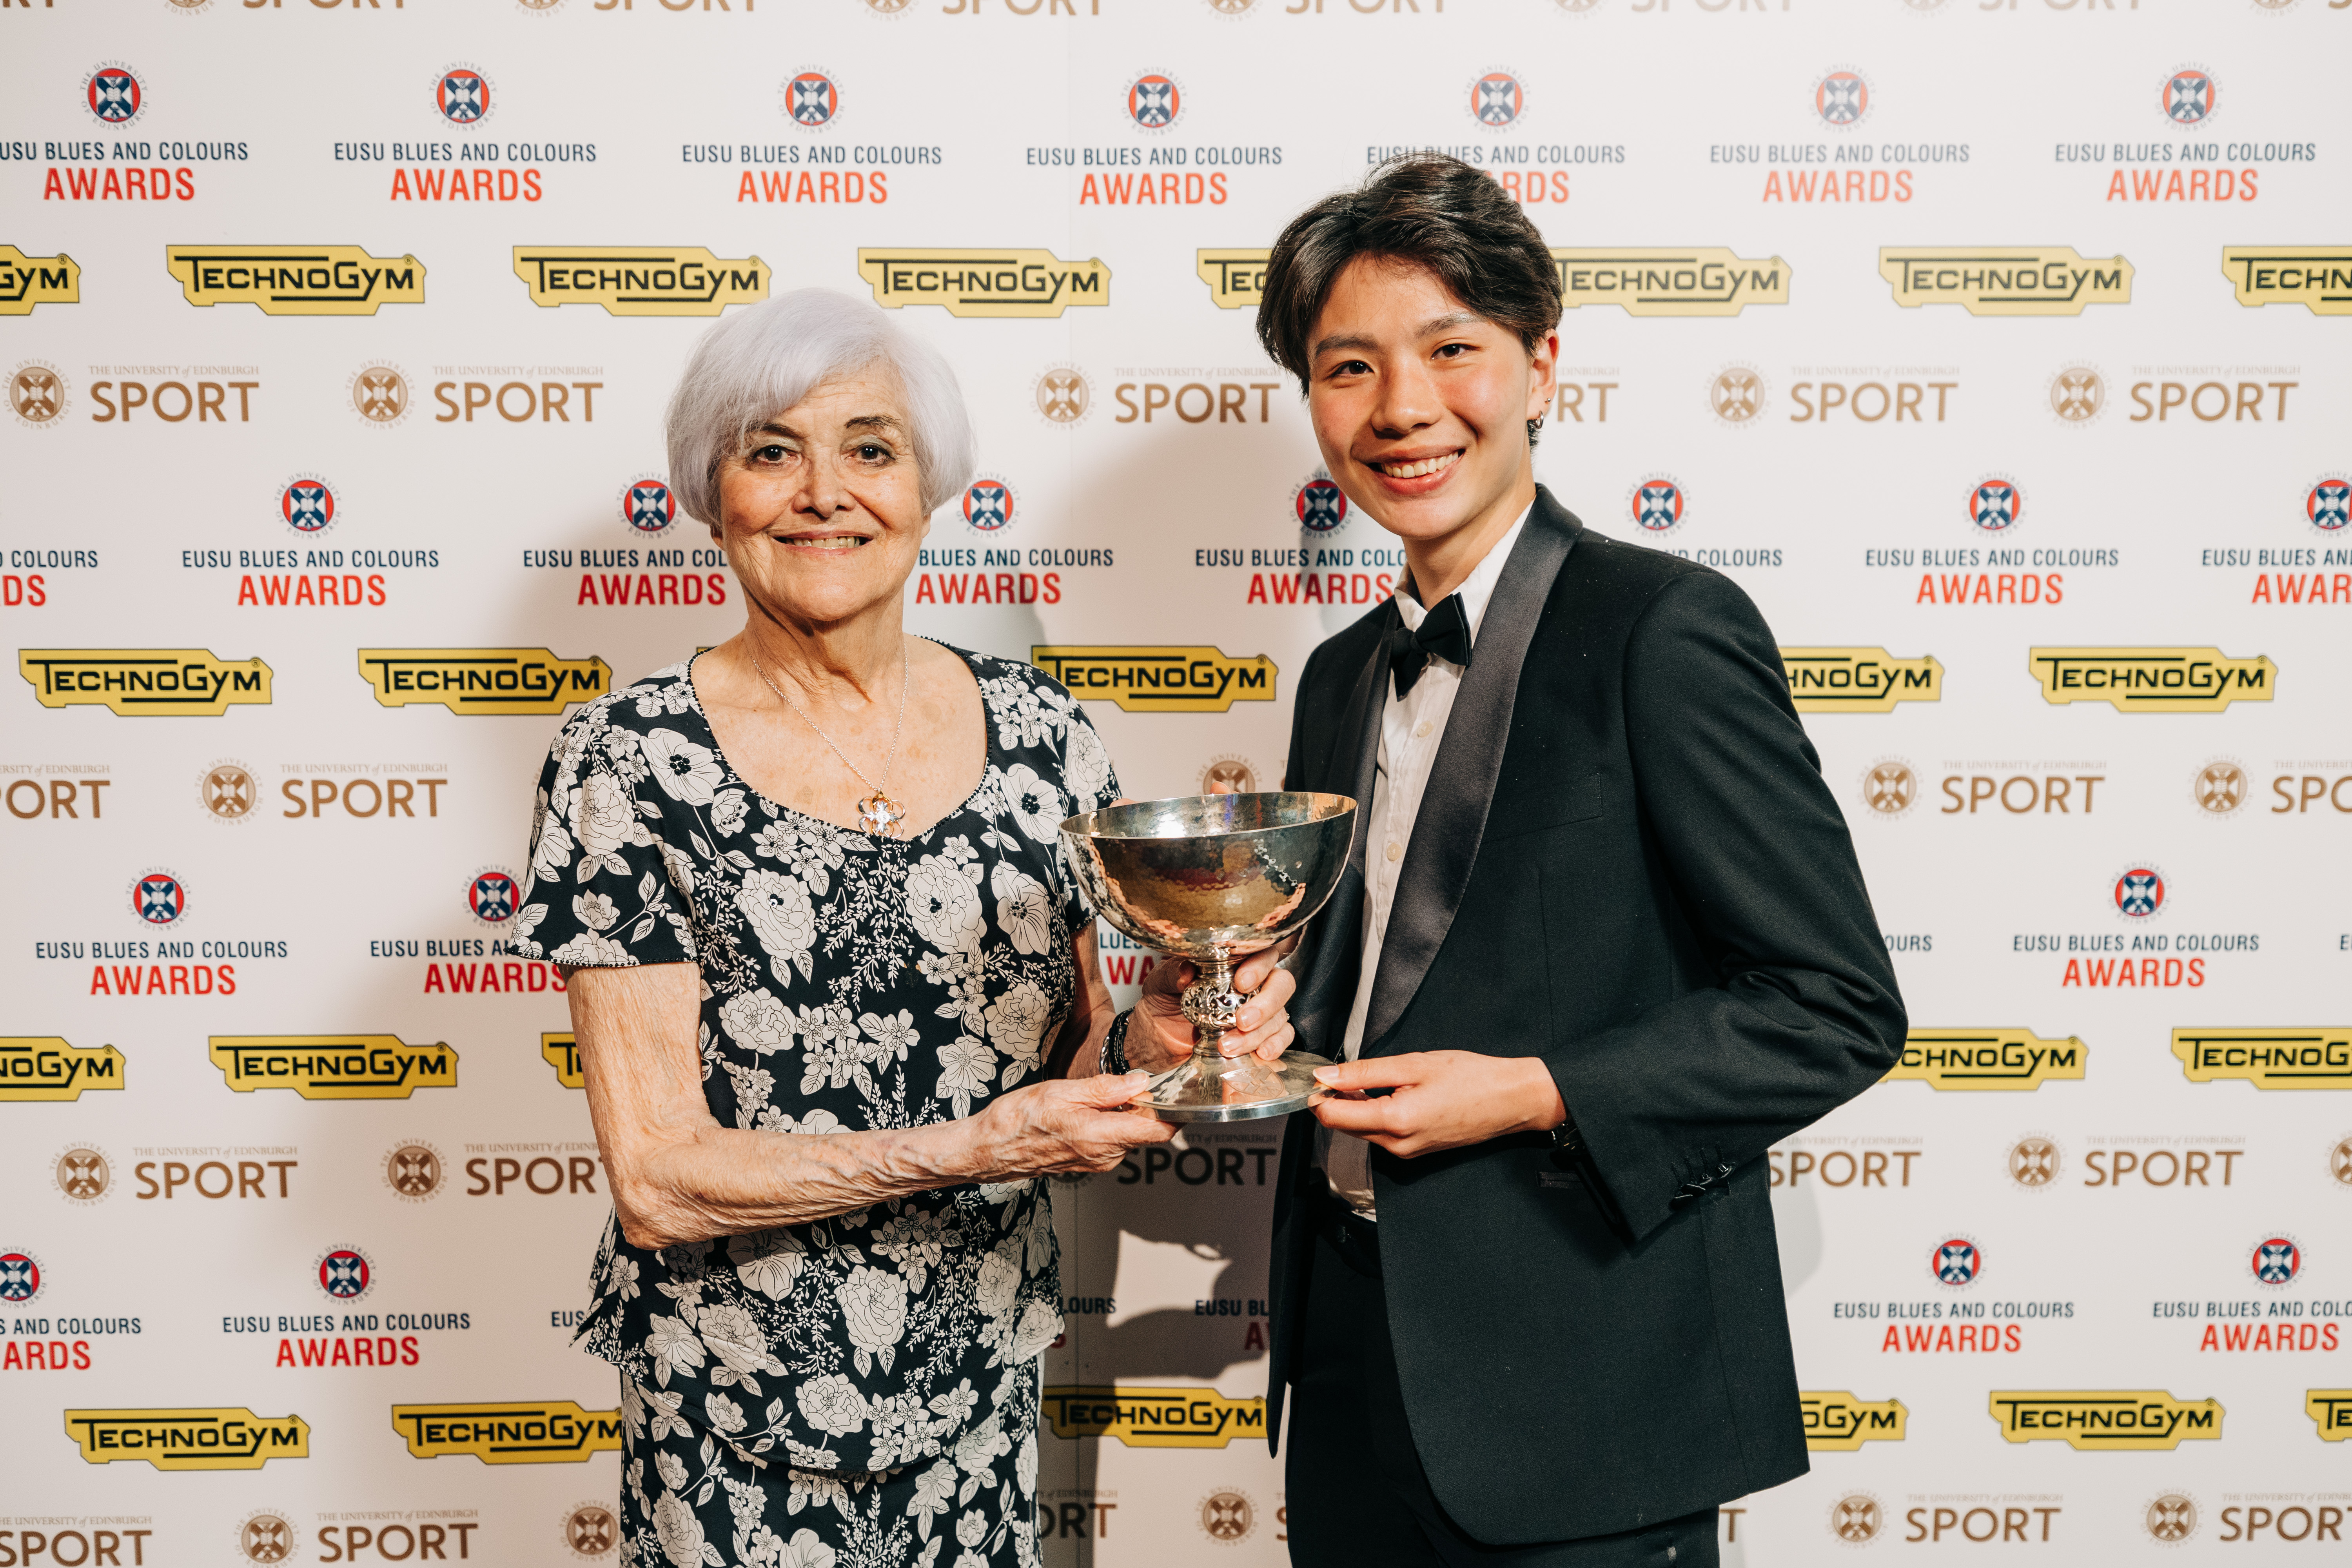 Chin Man Yang receiving the Alex Currie award from Pamela Currie